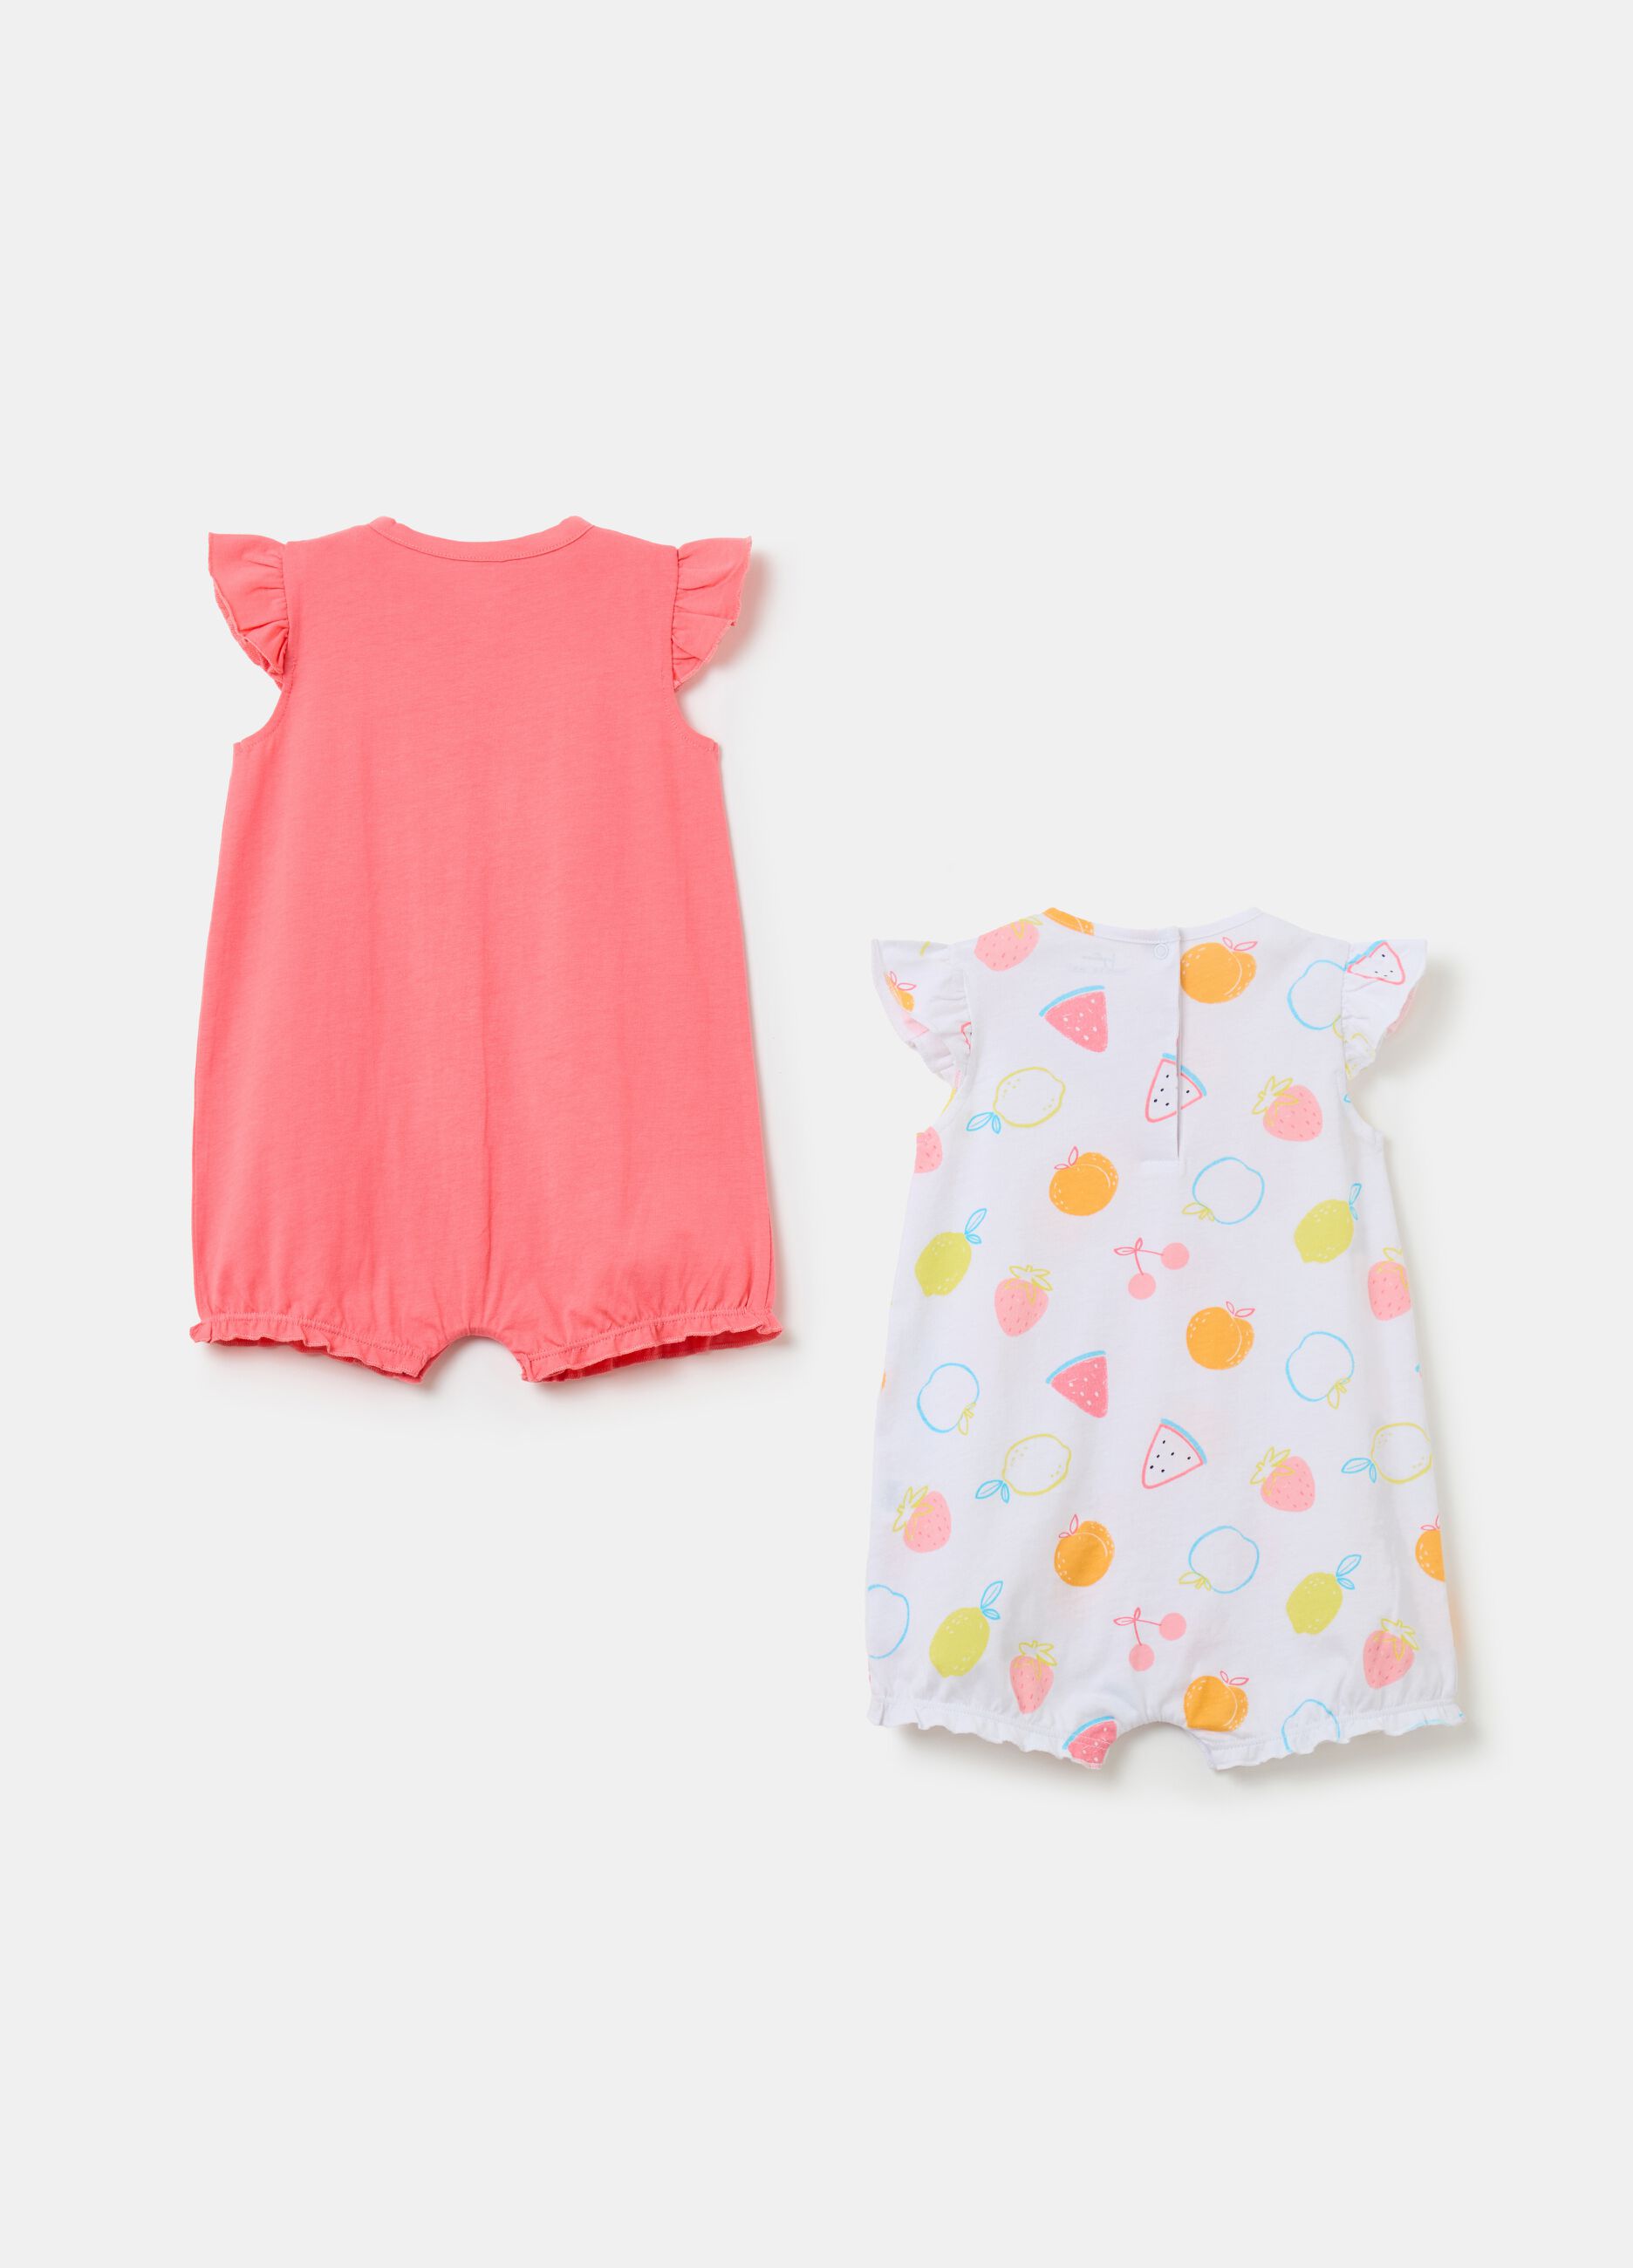 Two-pack romper suits in organic cotton